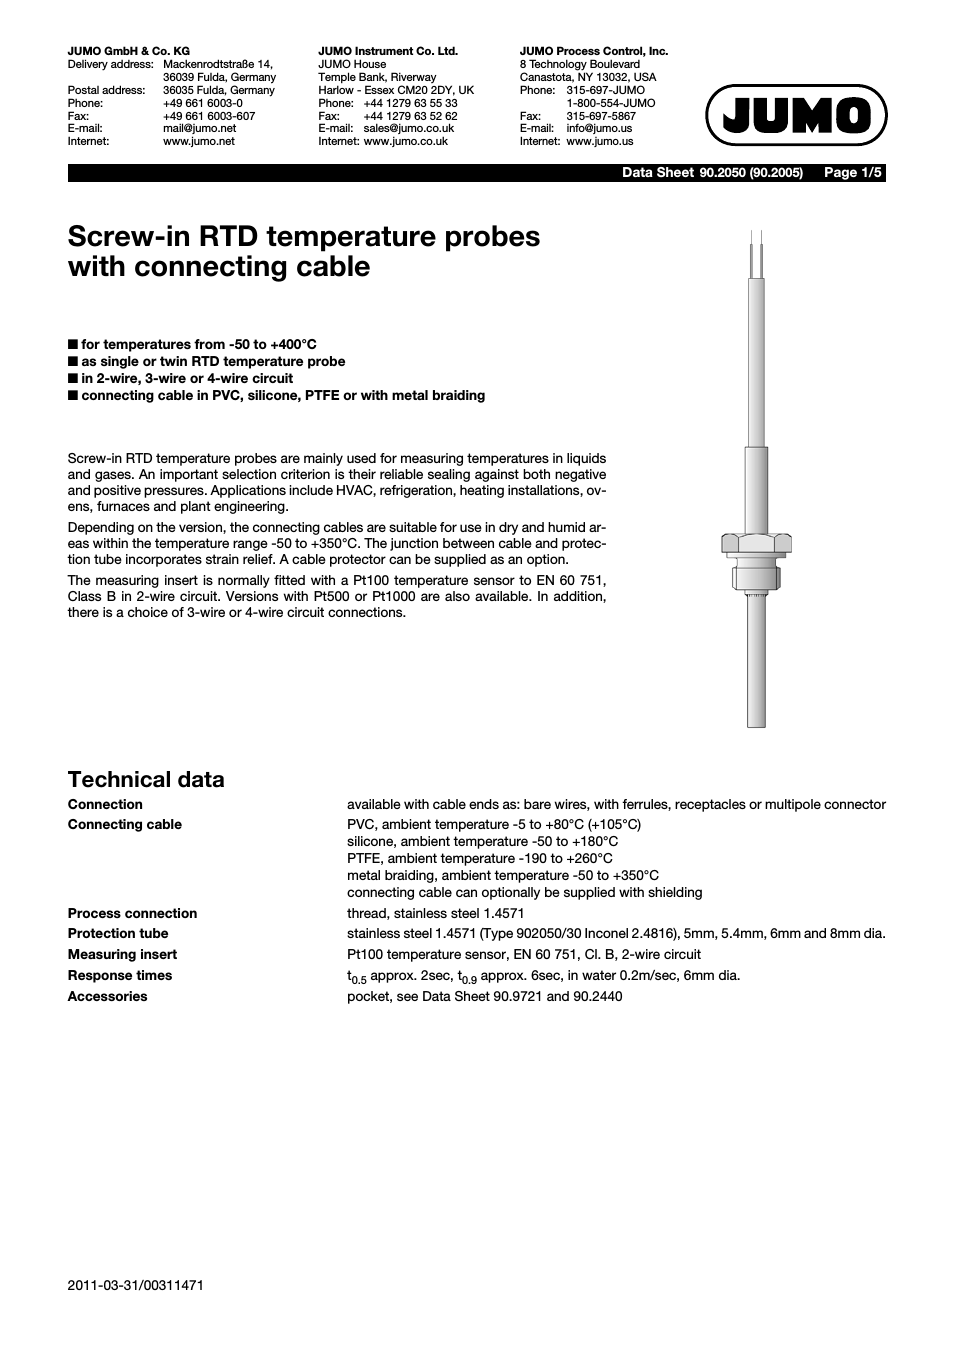 902050 Screw-In RTD Temperature Probe with Connecting Cable Data Sheet